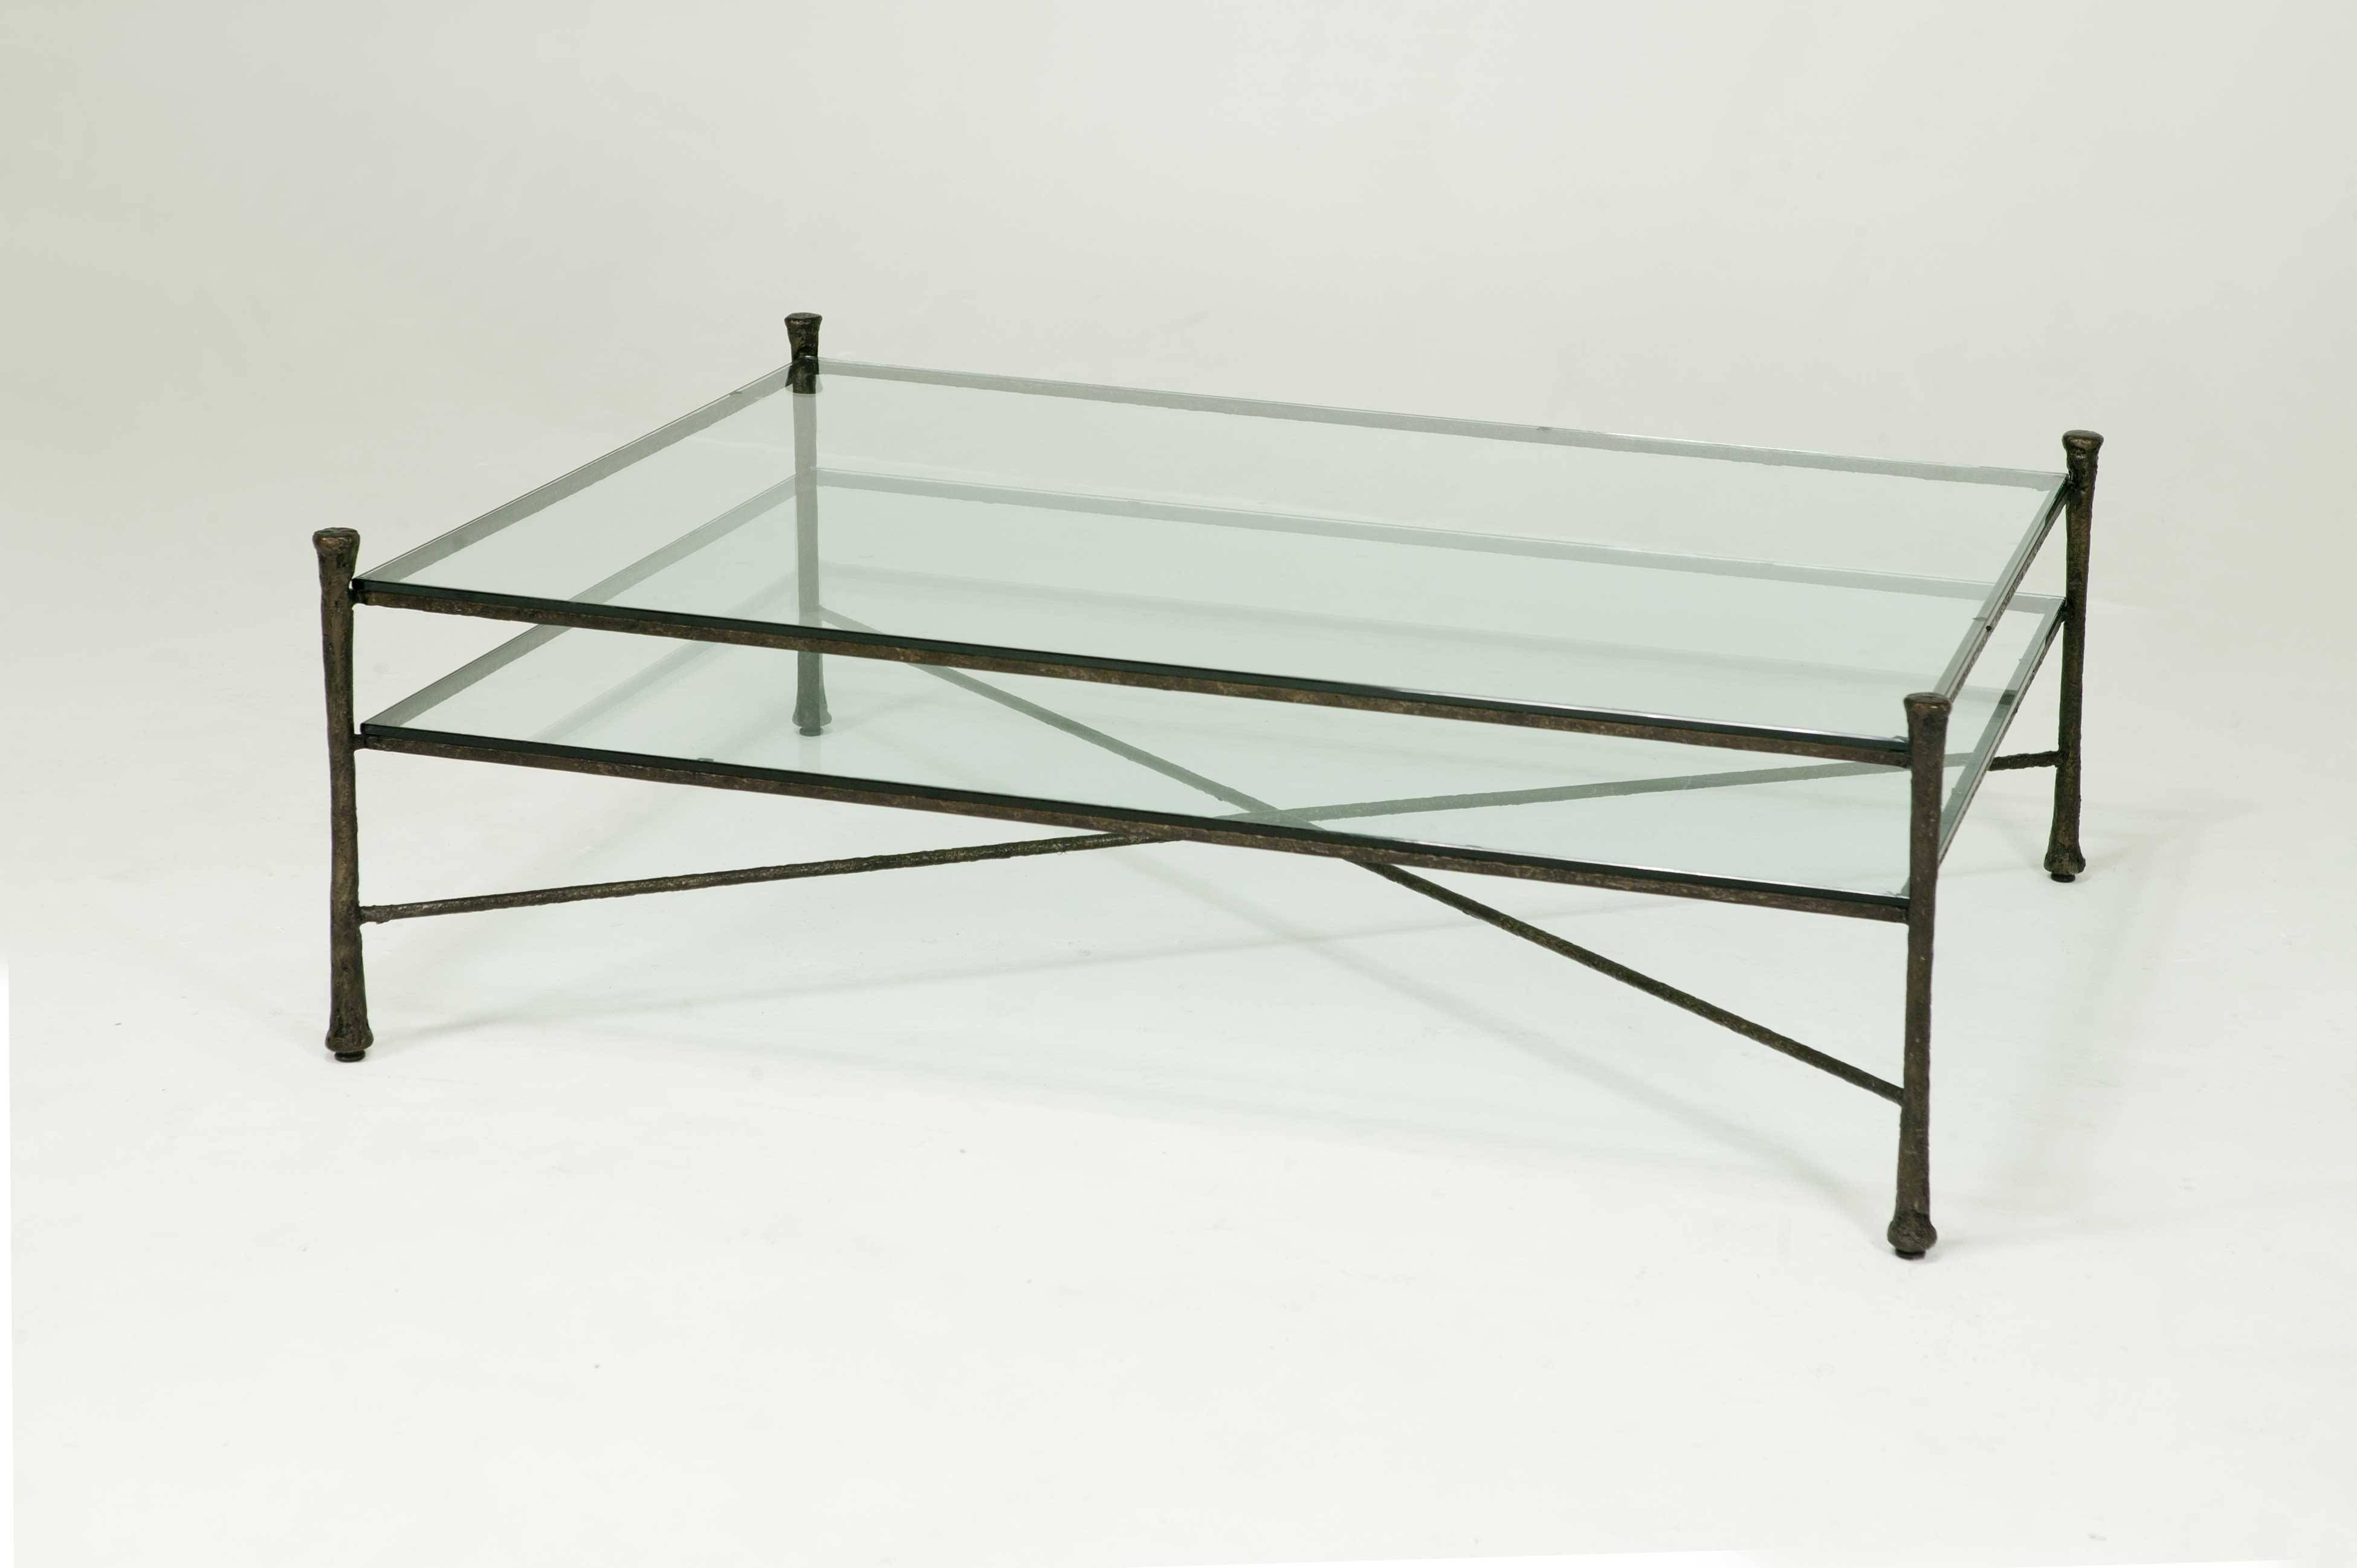 Black Metal Coffee Table With Glass Top | Coffee Tables Decoration In Metal Coffee Tables With Glass Top (View 5 of 31)